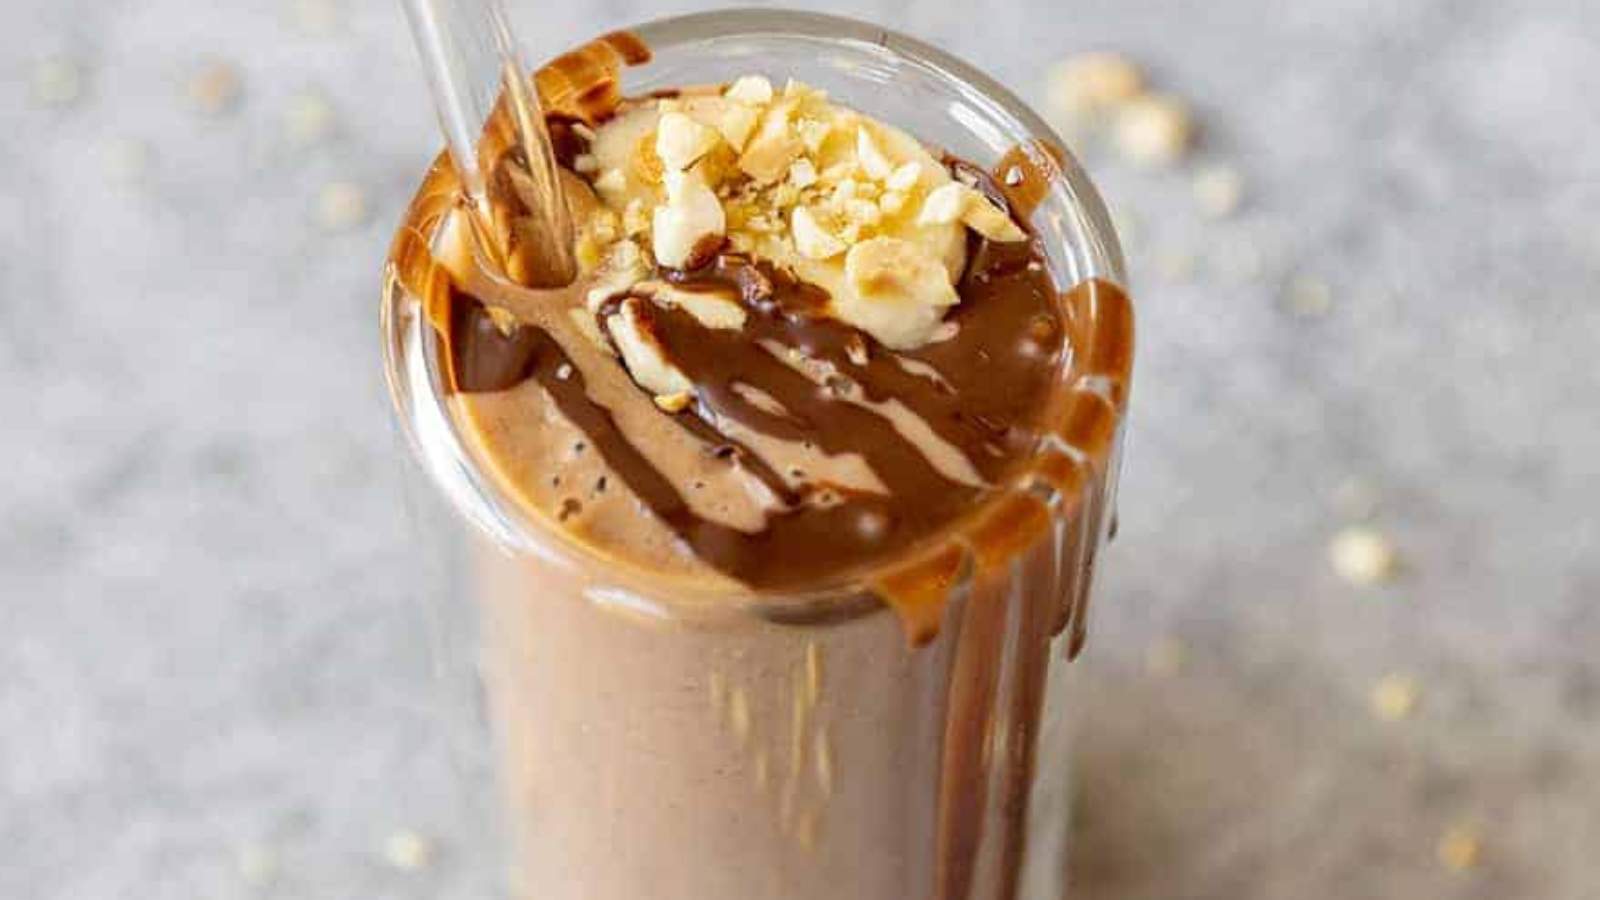 Chocolate Peanut Butter Smoothie recipe by Delish Knowledge.